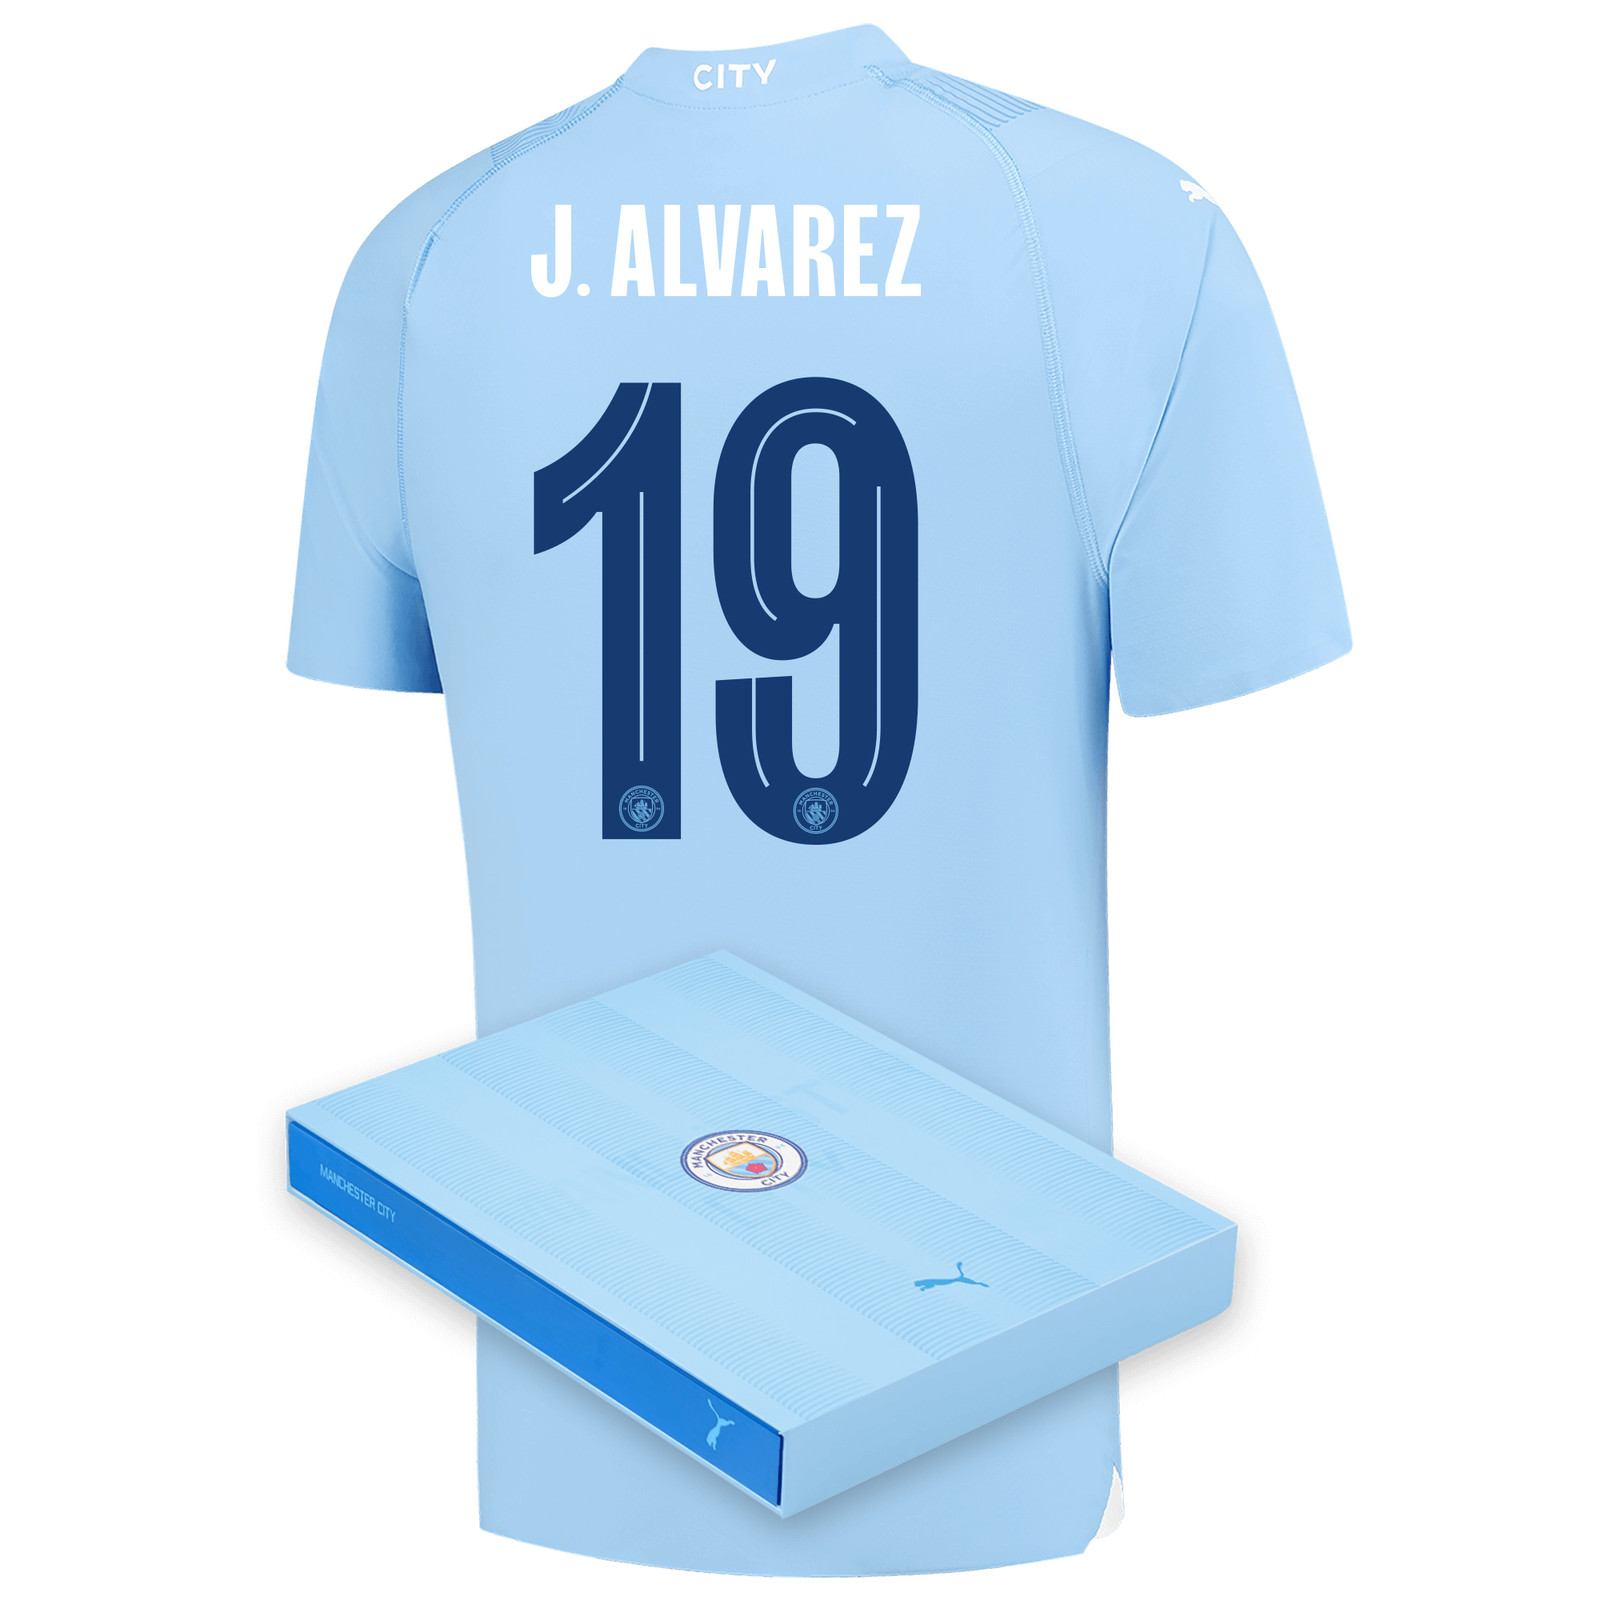 Julian Alvarez football jersey with number 19 Canvas Print for